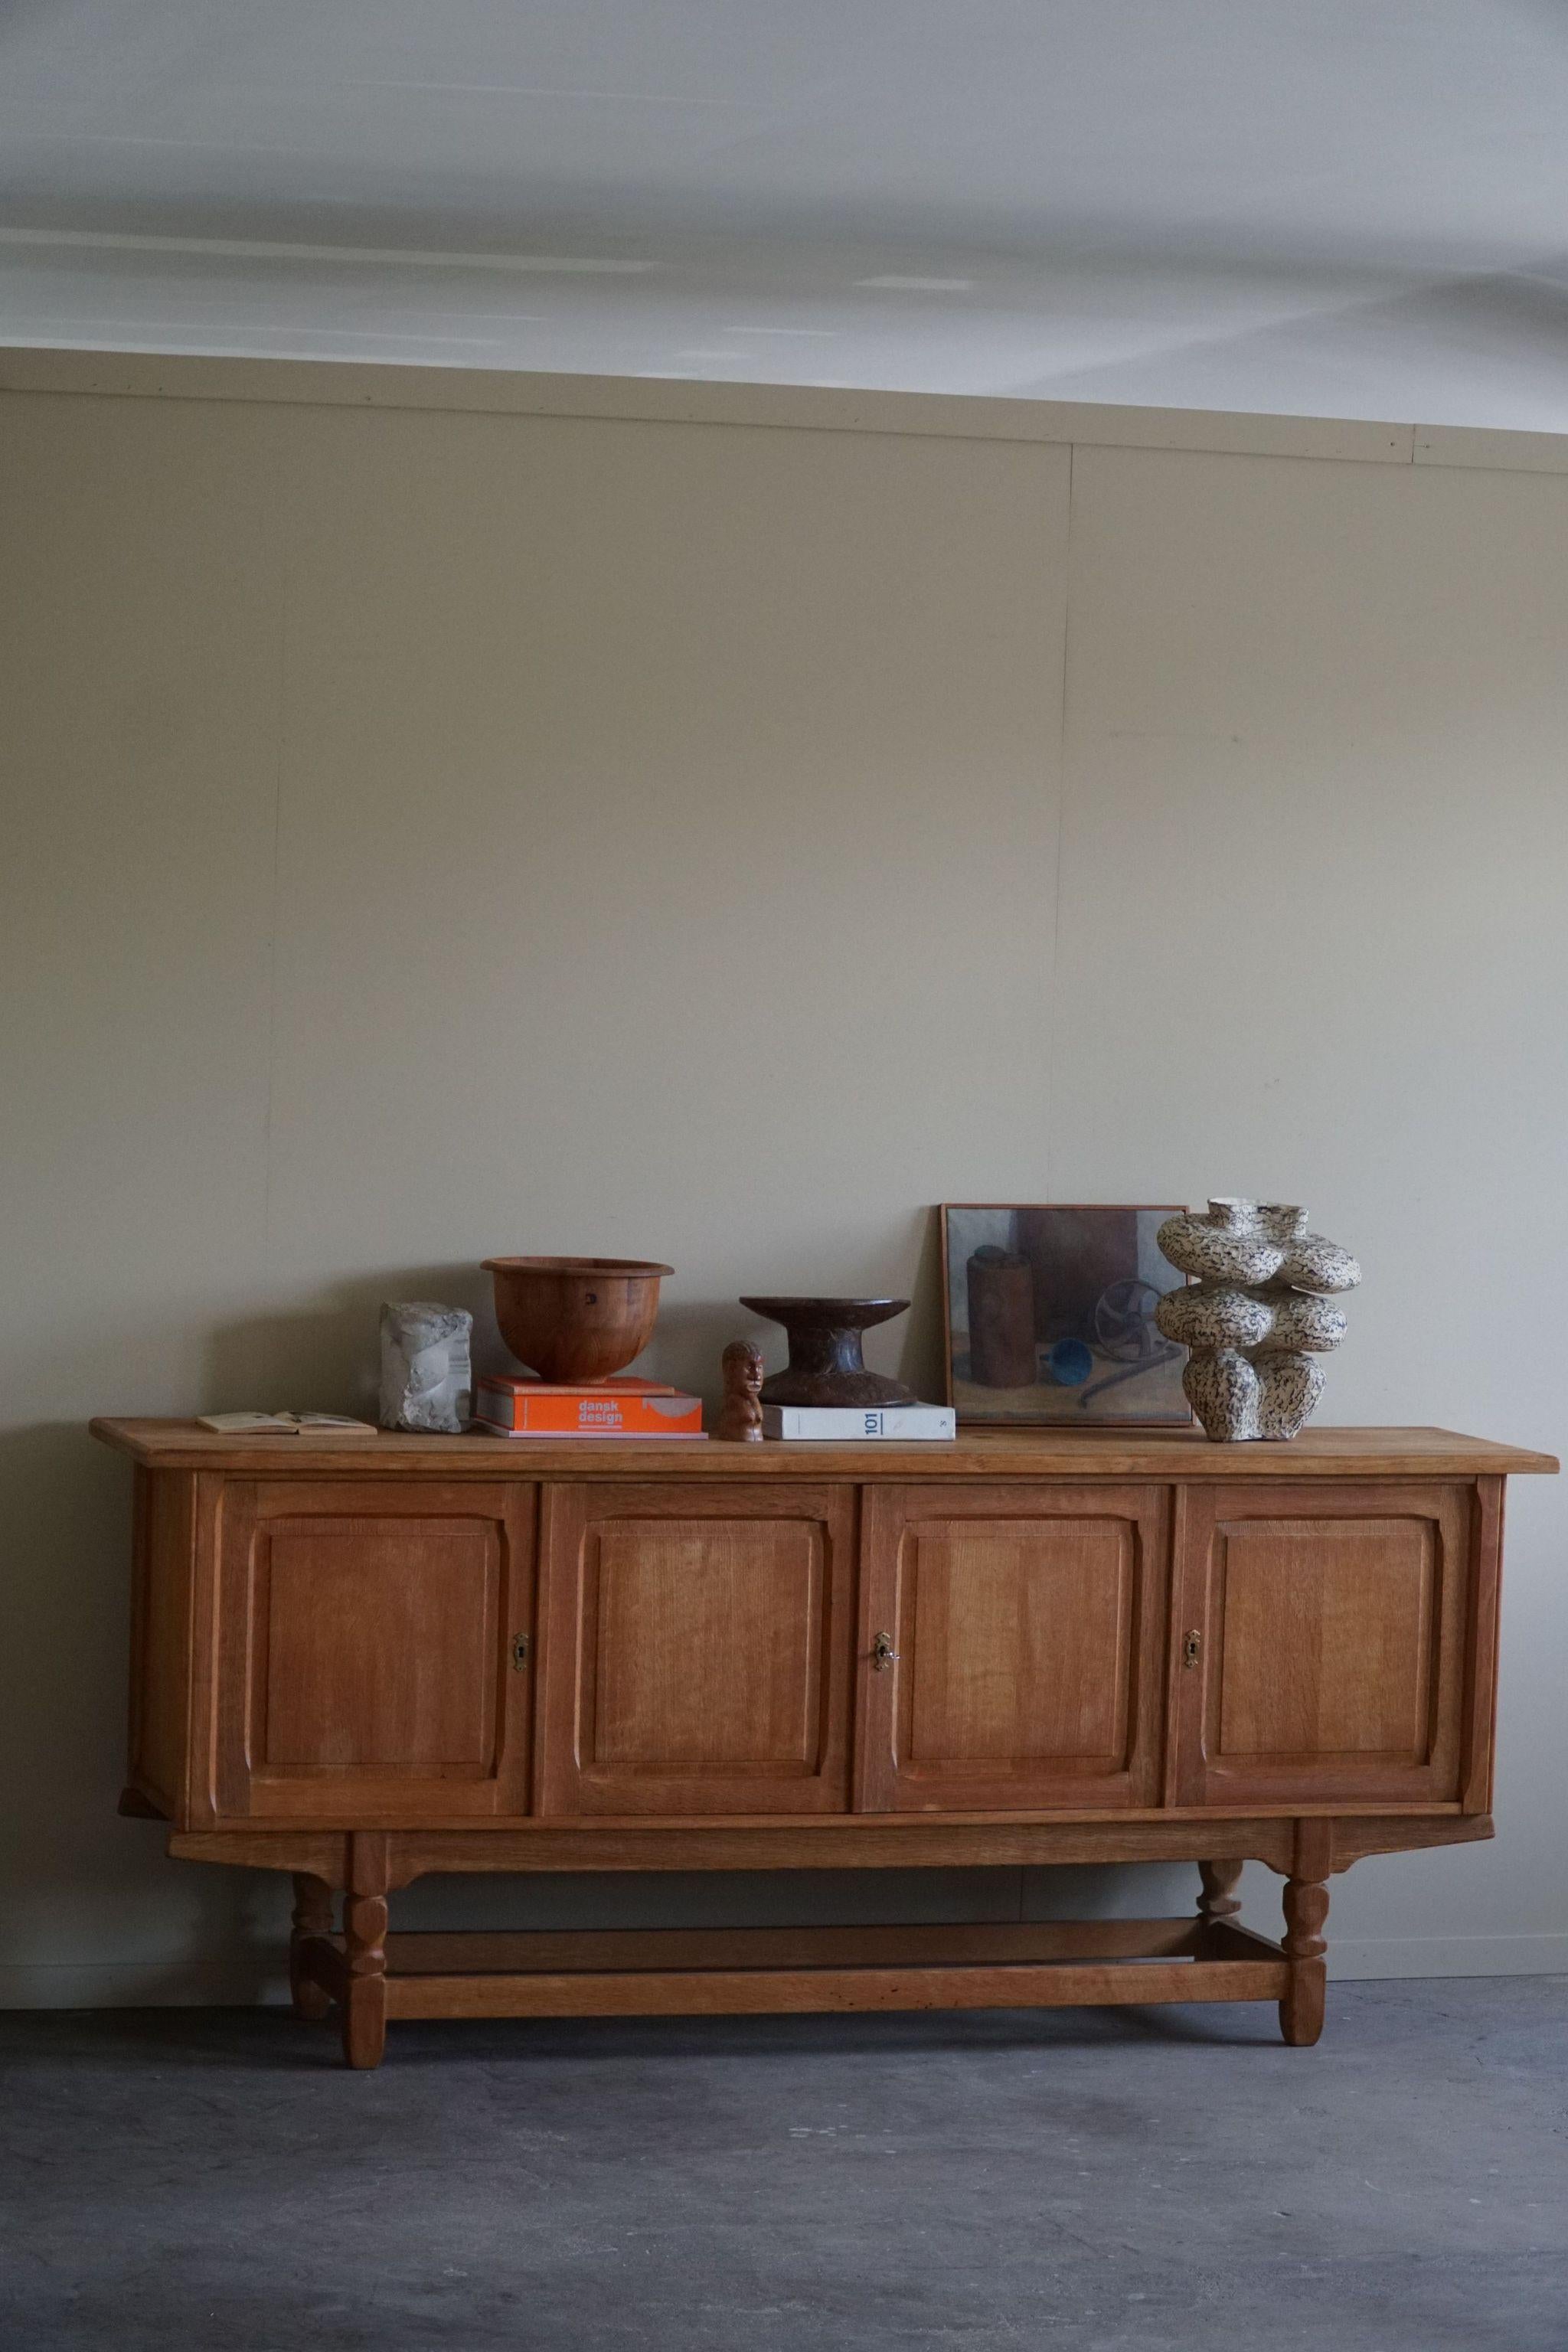 Beautiful low classic sideboard / cabinet in solid oak with plenty of storage space. Made by a Danish cabinetmaker in the 1960s.

This brutalist object will fit into many interior styles. A modern, Scandinavian, Classic or an Art Deco home